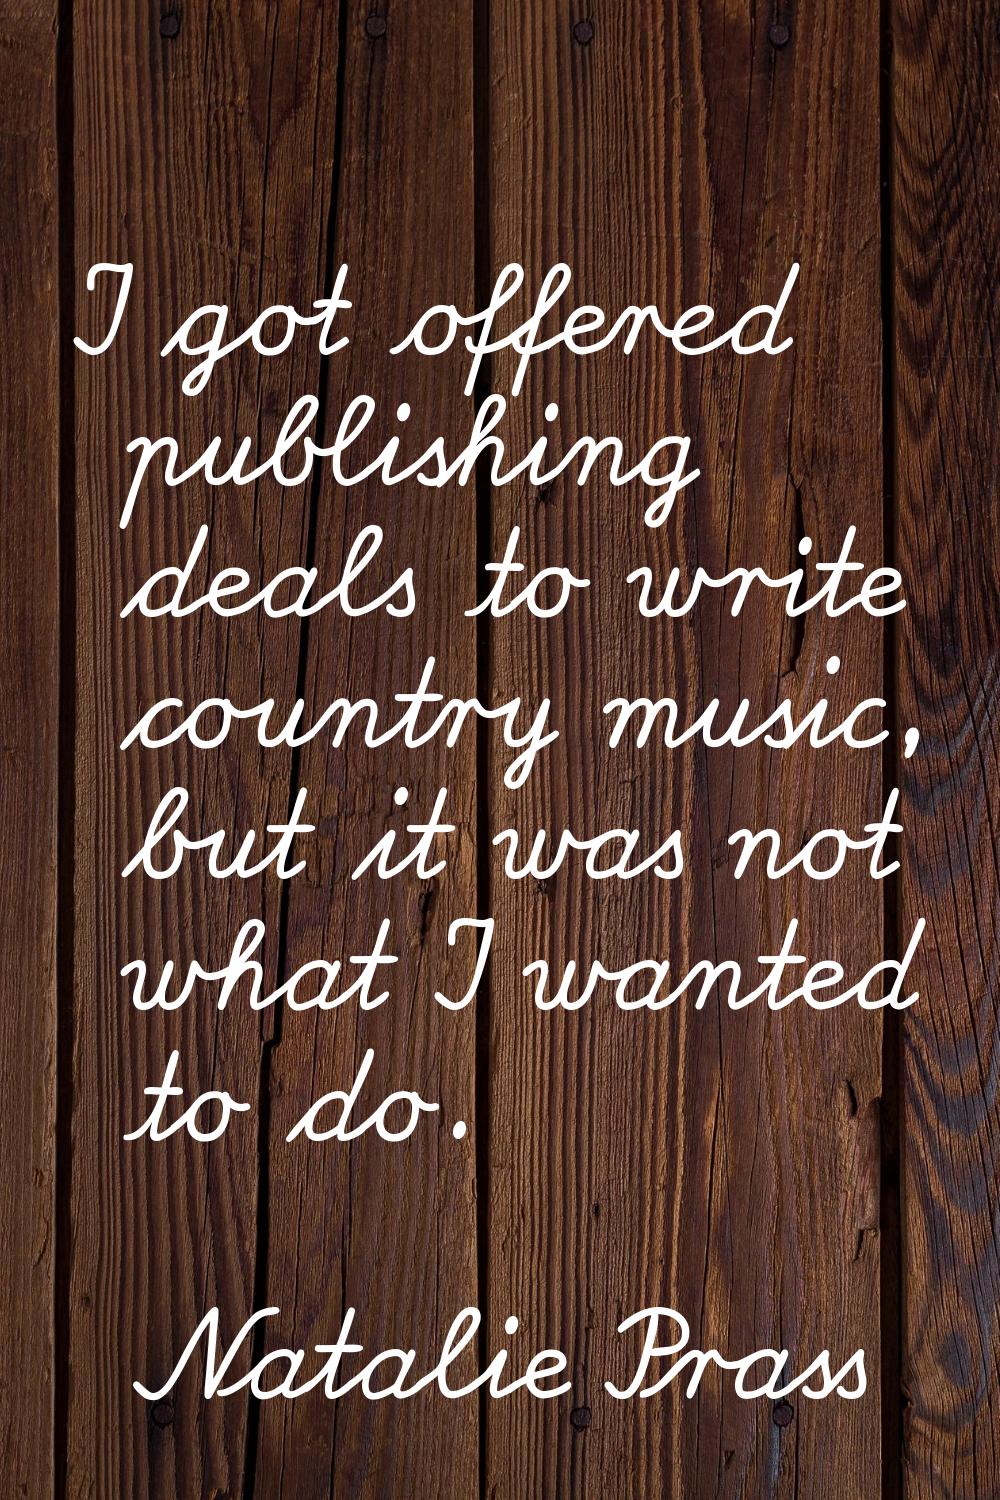 I got offered publishing deals to write country music, but it was not what I wanted to do.